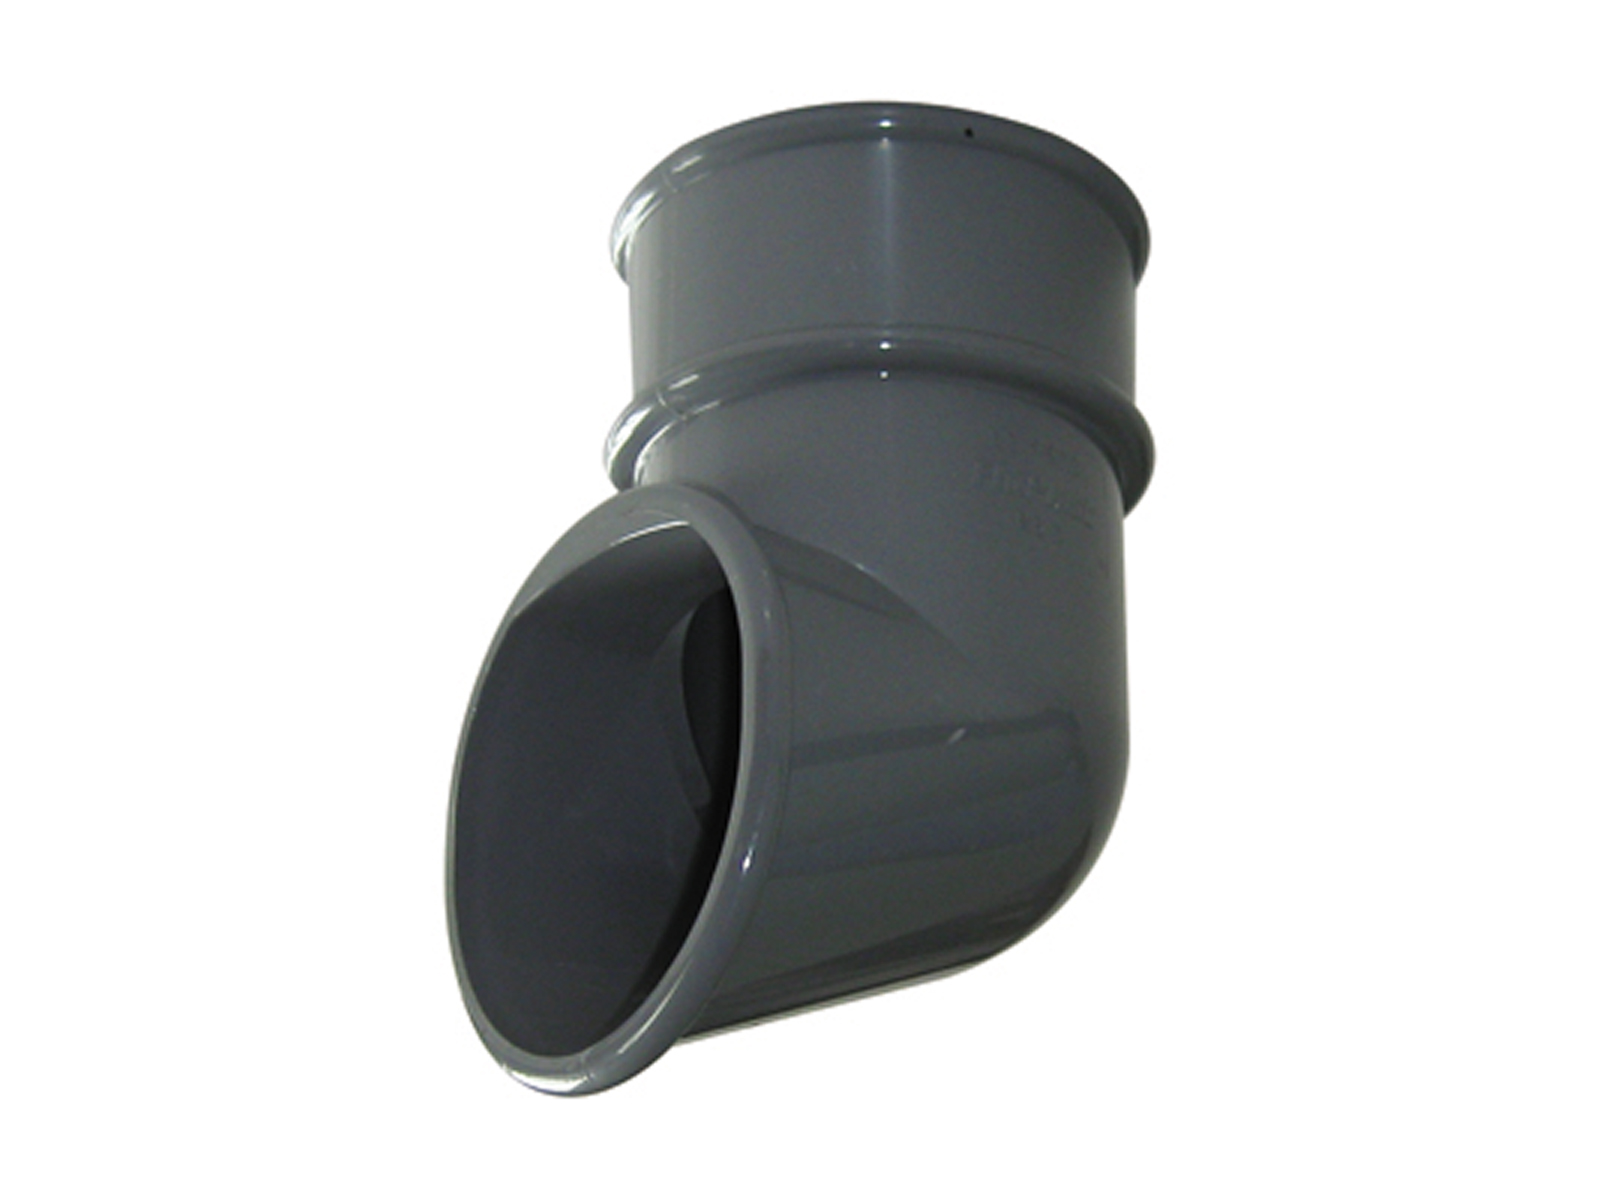 Floplast RB3GR 68mm Round Downpipe - Shoe - Grey